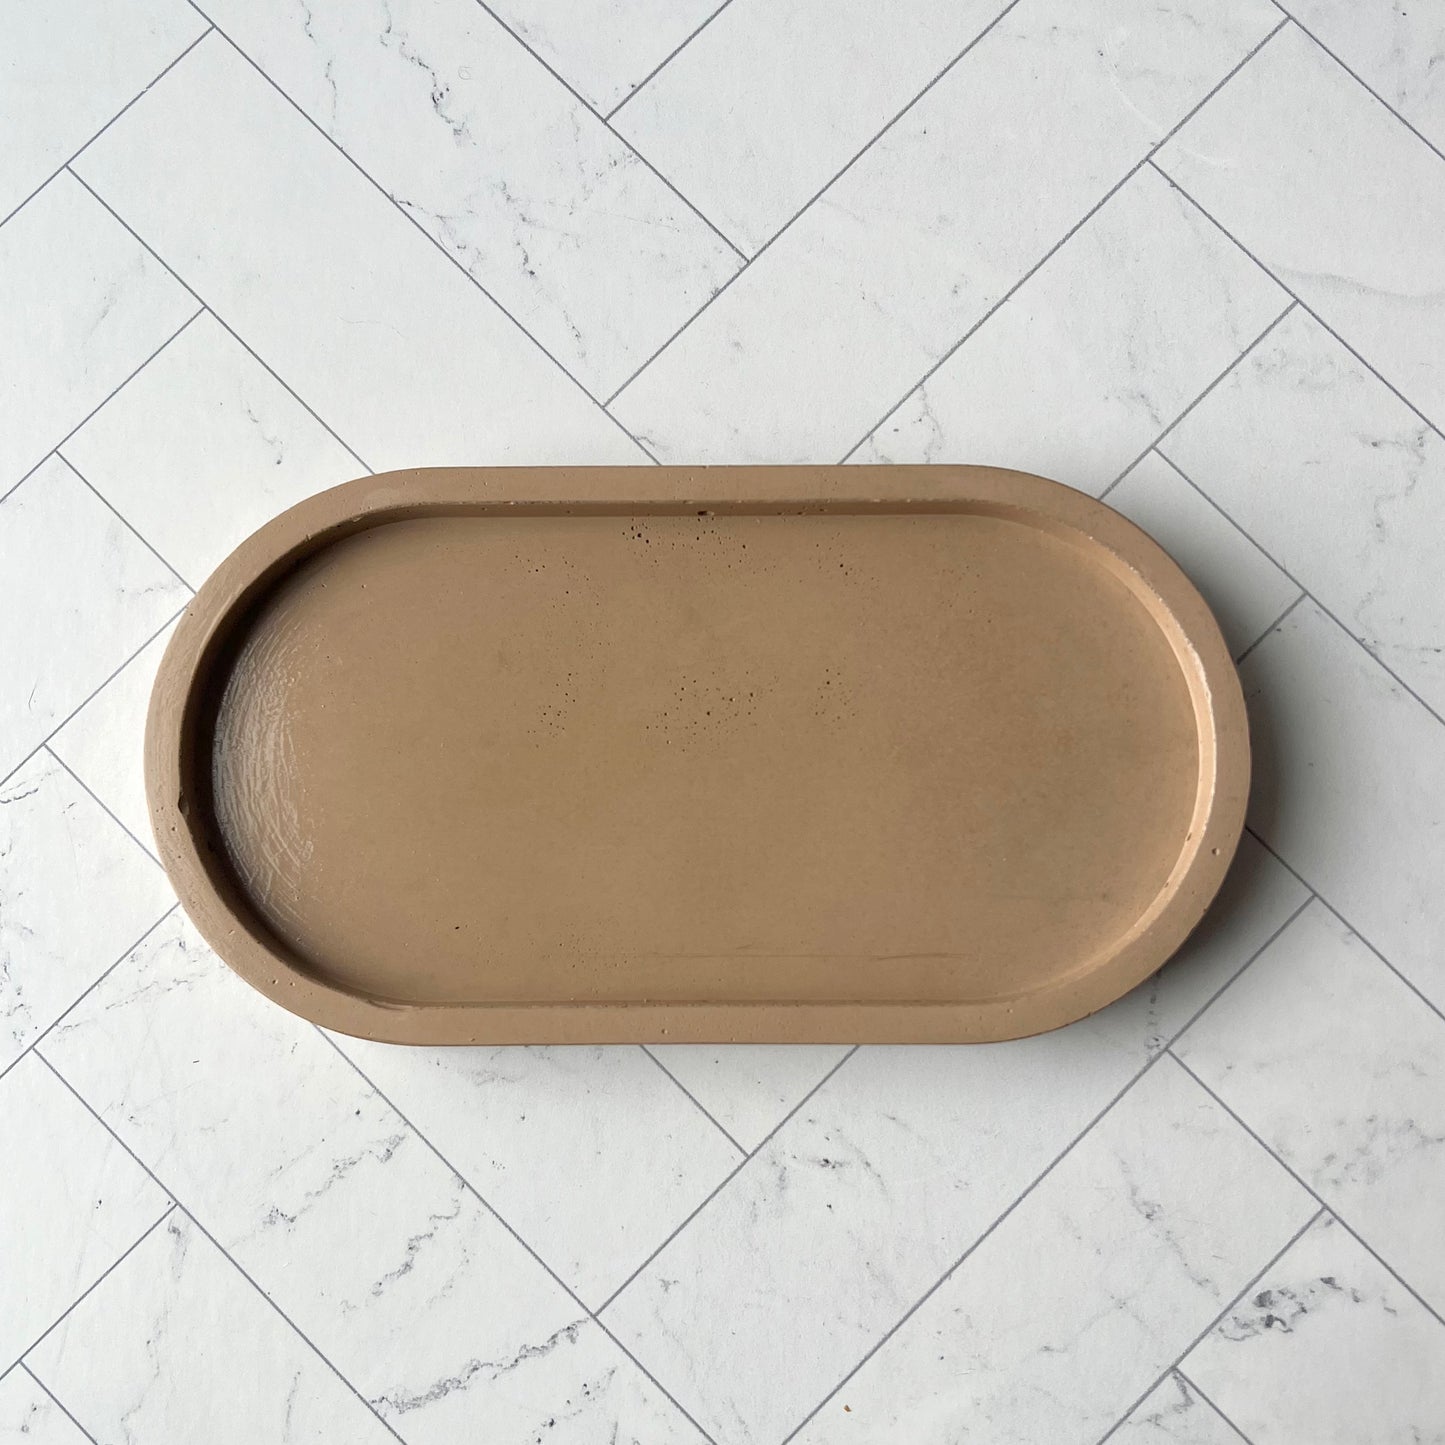 A light brown oval tray shown from overhead